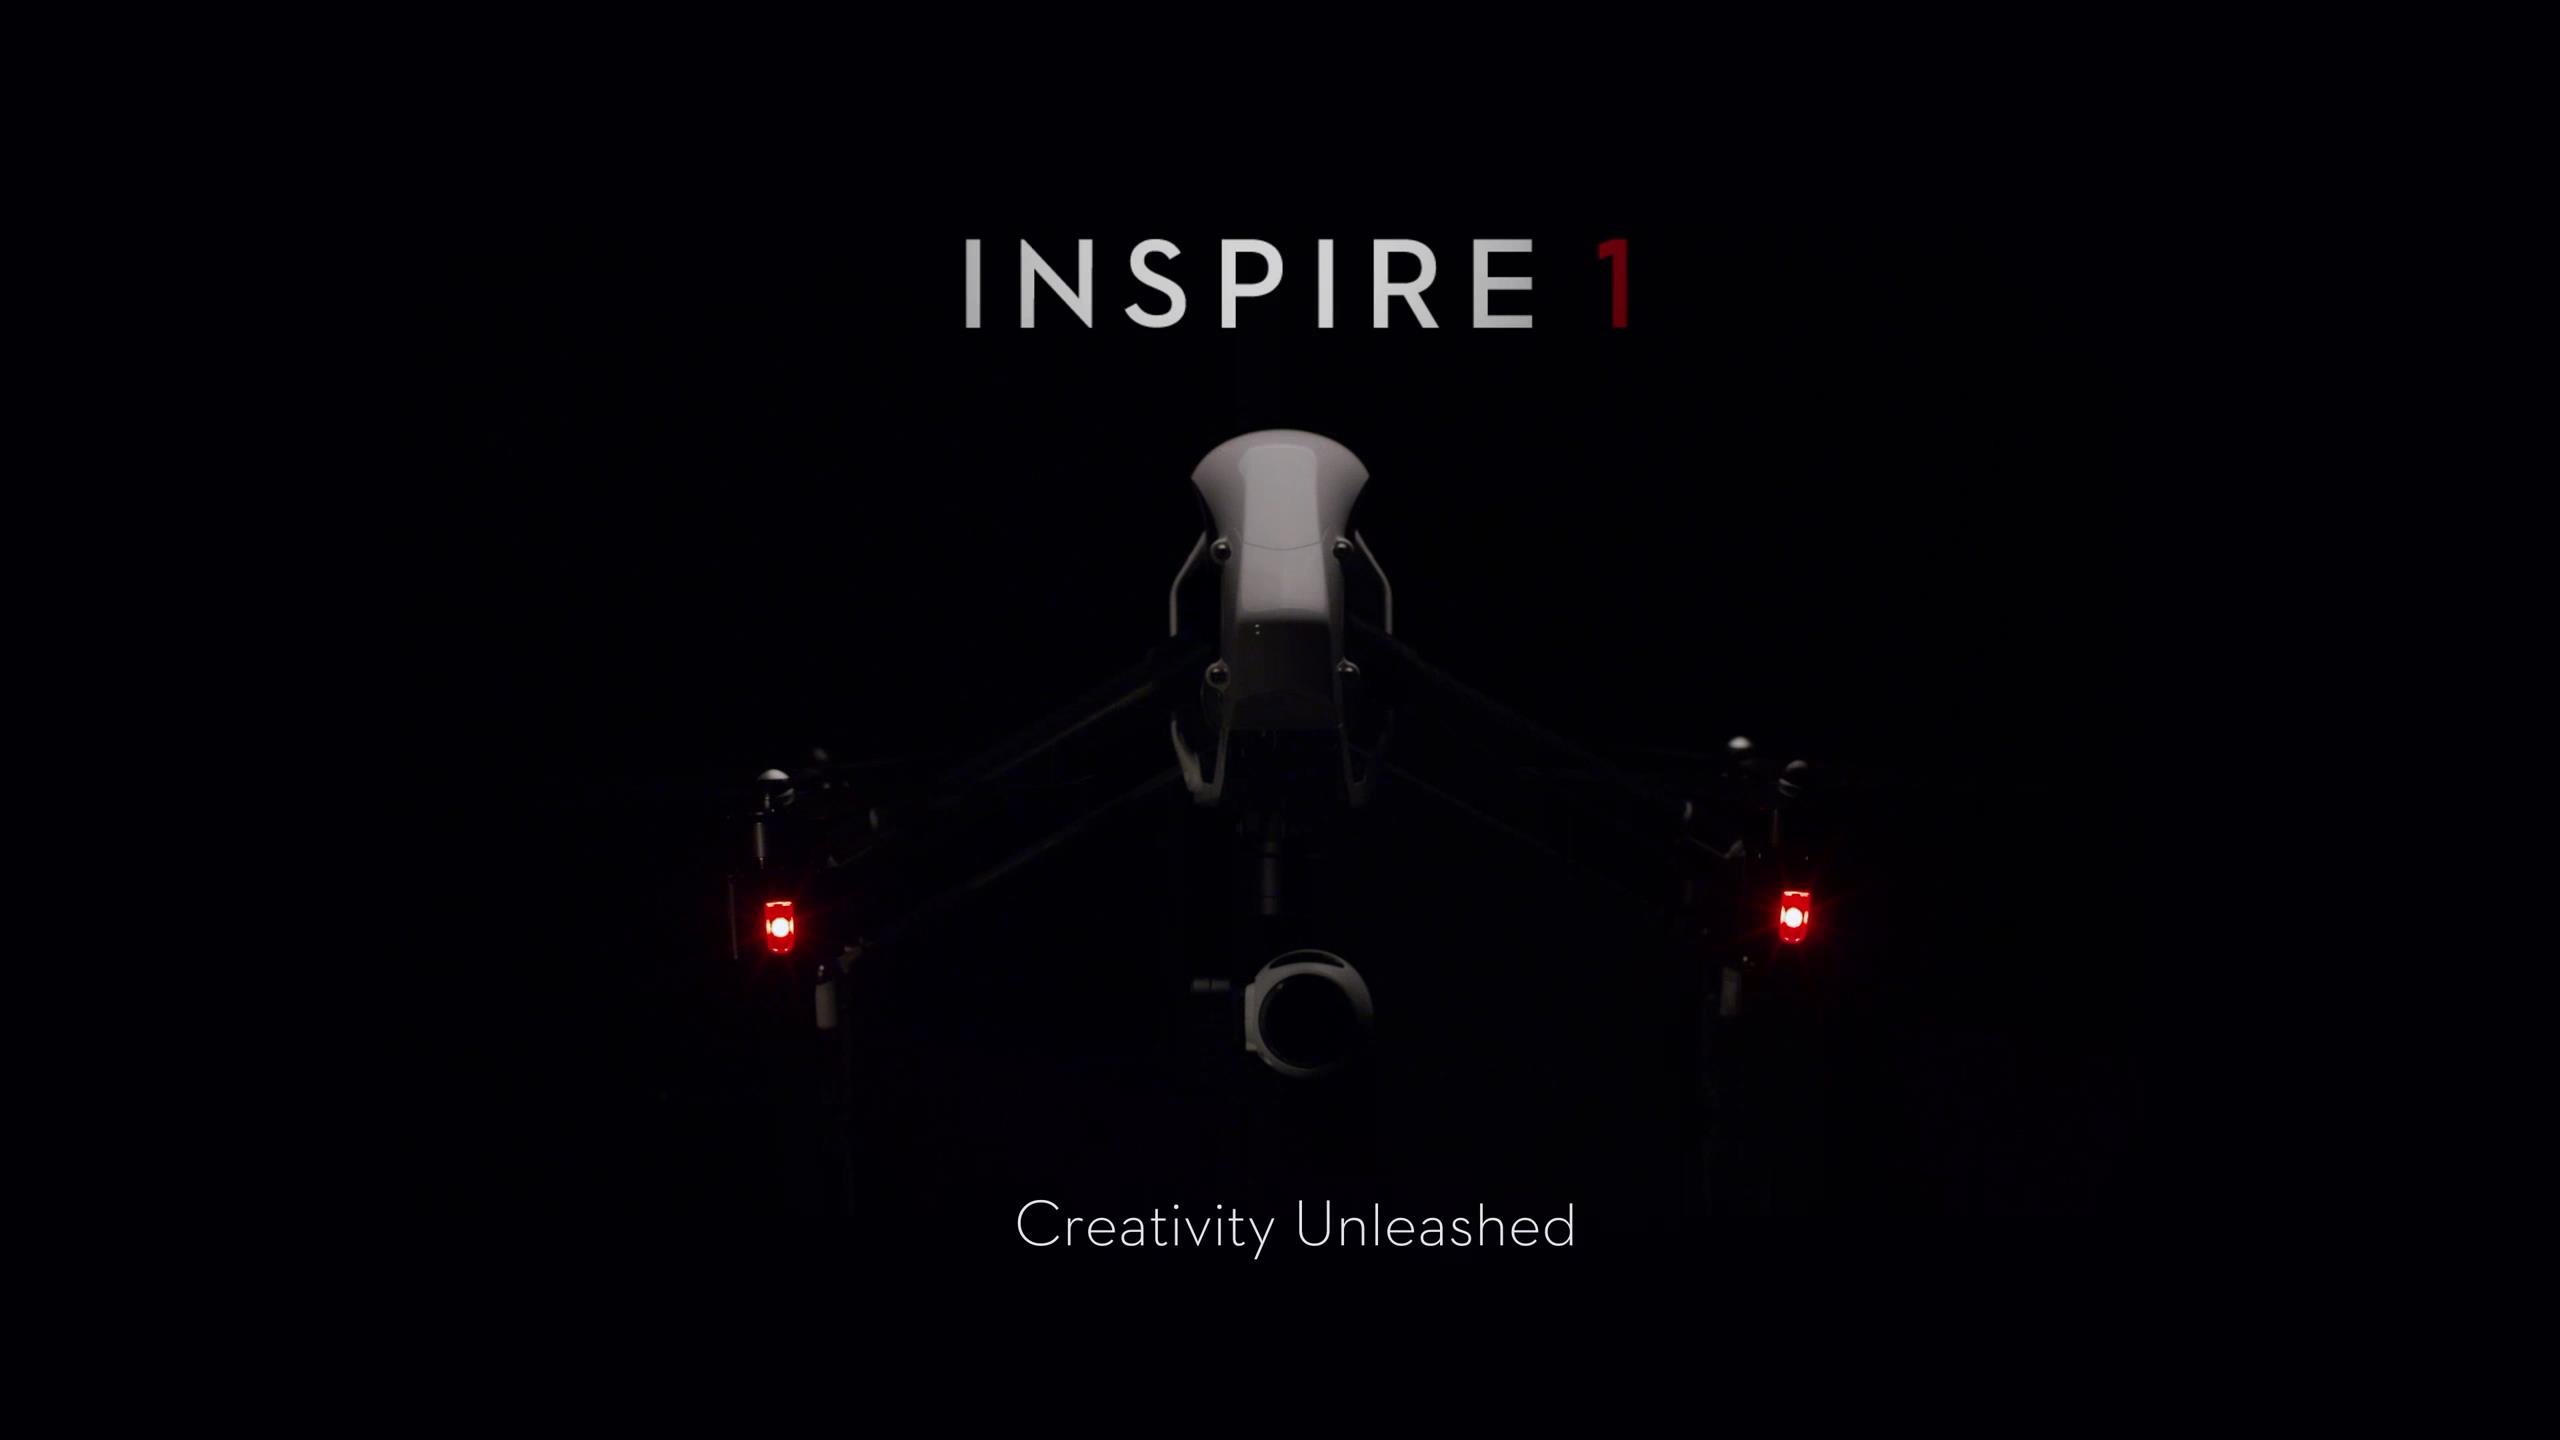 Dji Introducing The Inspire Featuring Philip Bloom